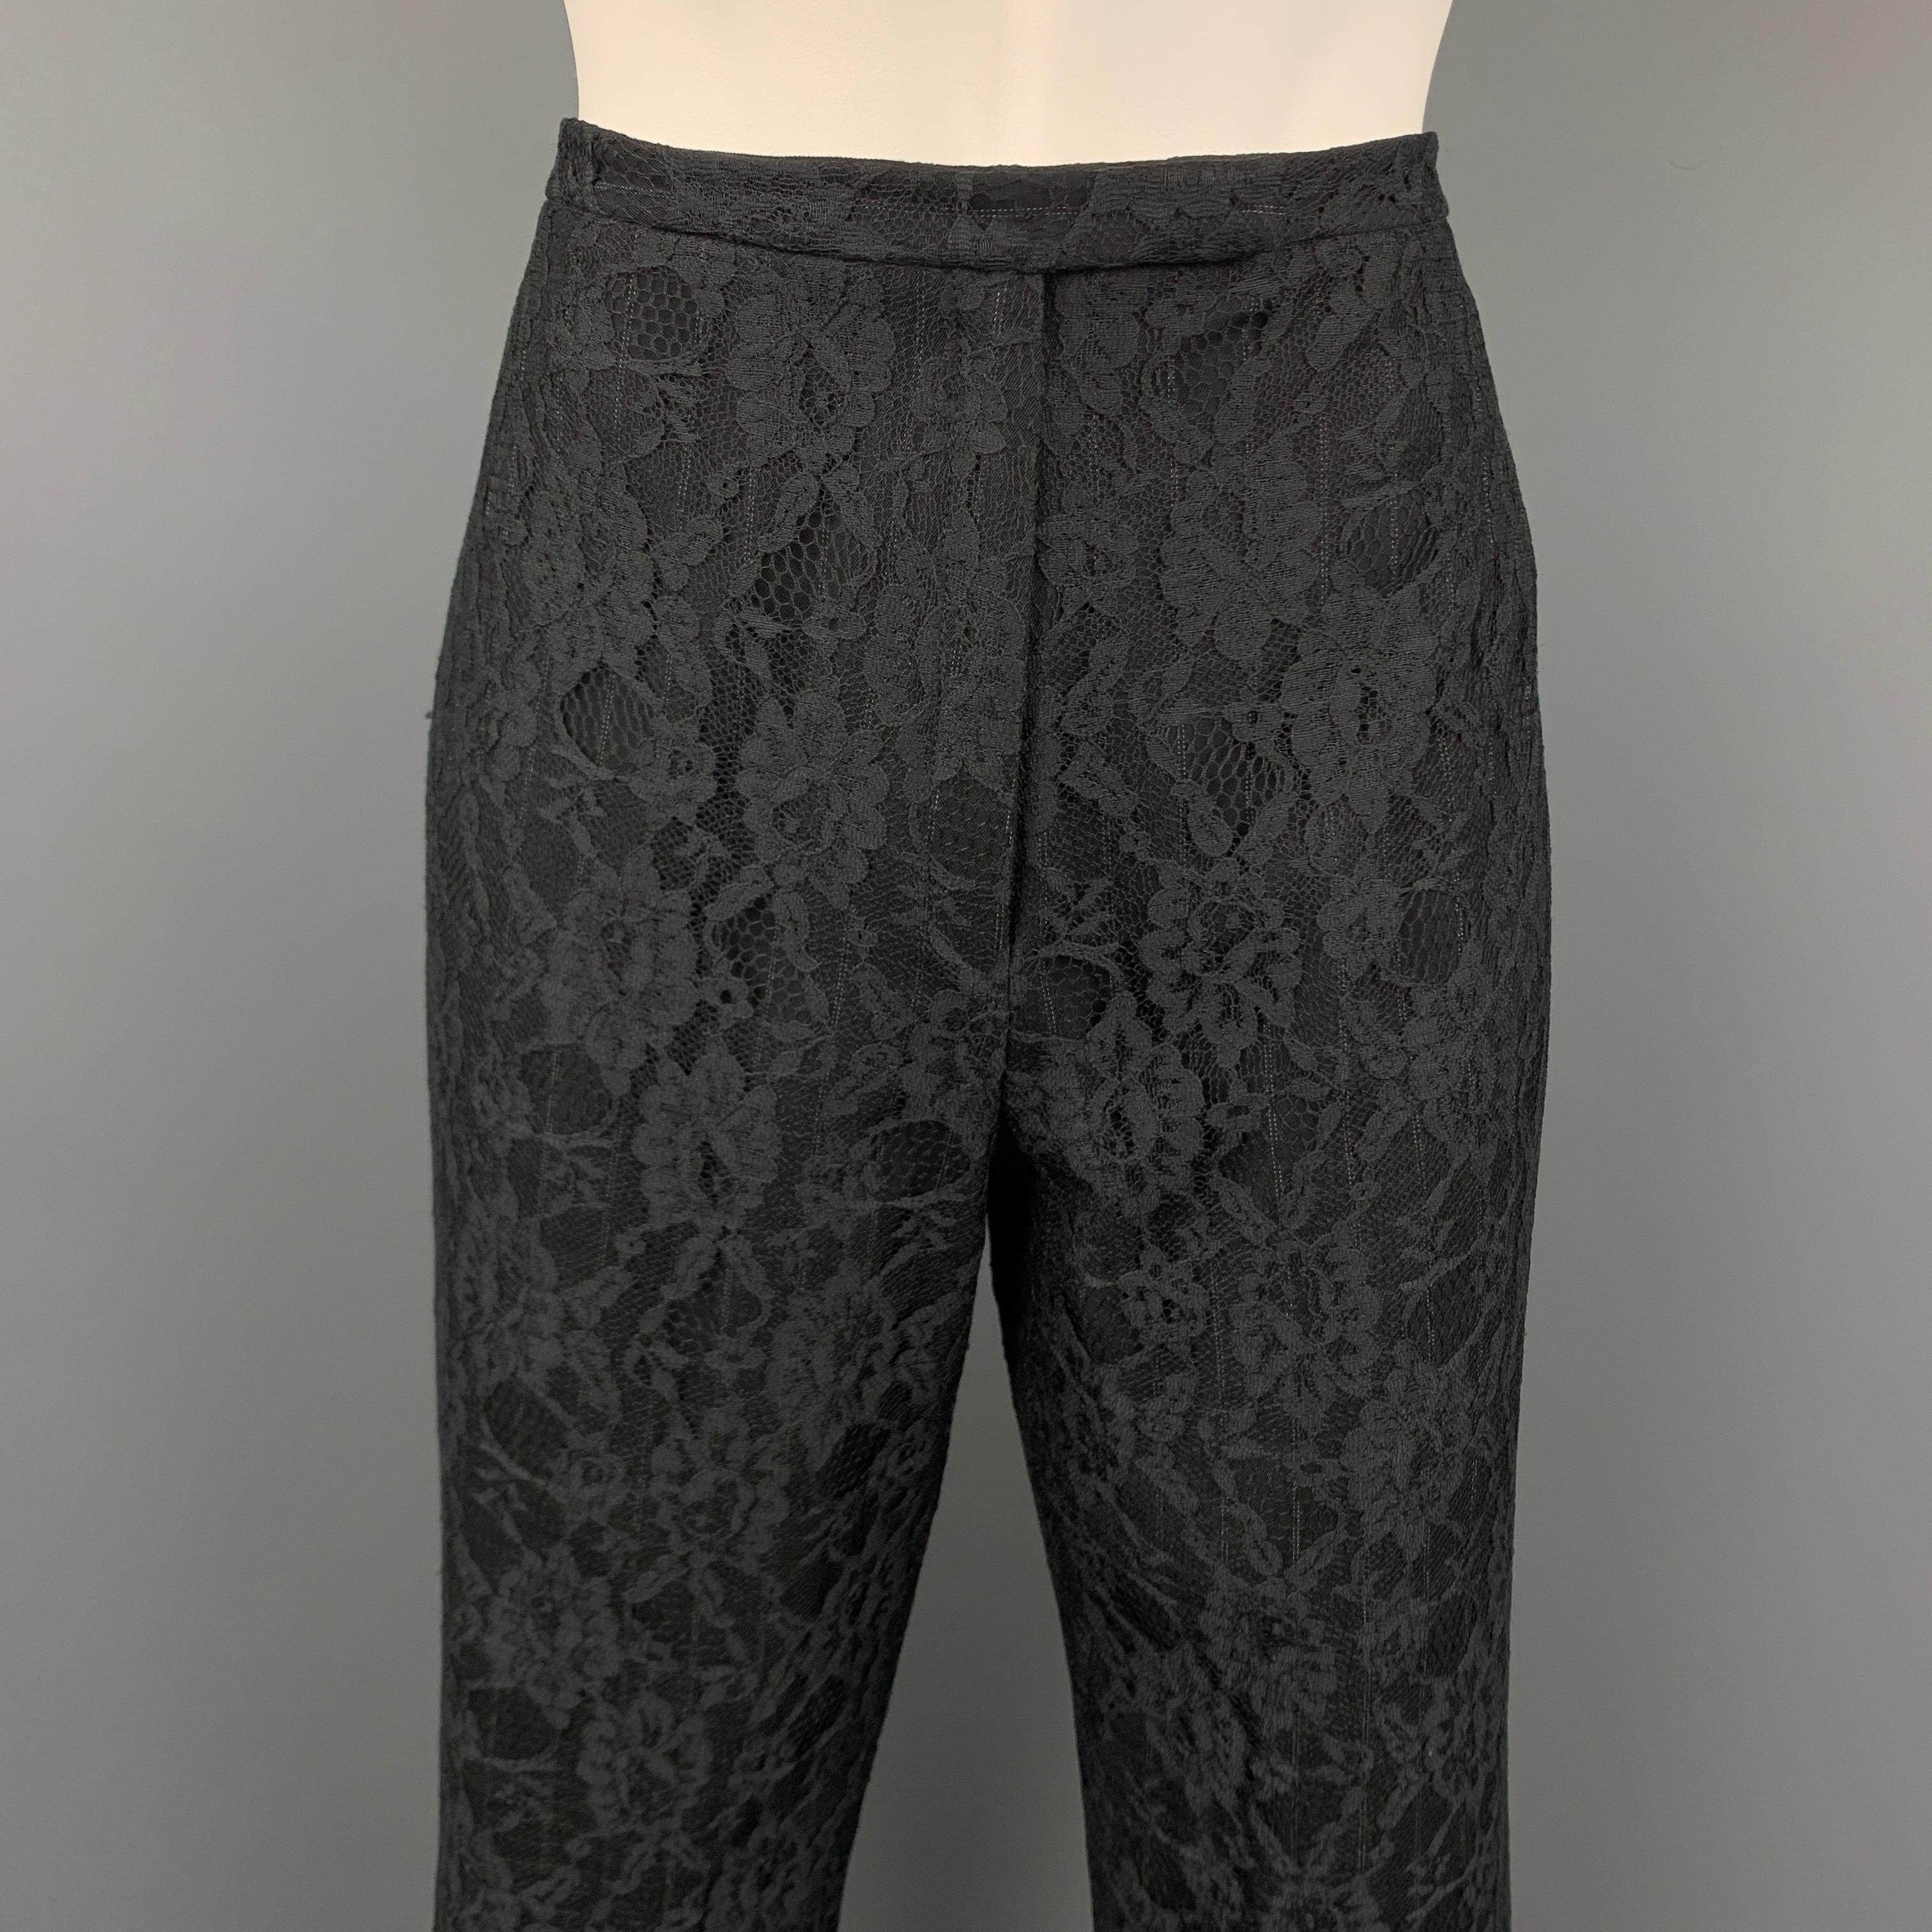 Vintage RICHARD TYLER evening dress pants comes in a black lace wool blend featuring a straight leg, front tab, and a zip fly closure. Made in USA.

Very Good Pre-Owned Condition.
Marked: 10

Measurements:

Waist: 30 in. 
Rise: 10 in. 
Inseam: 28